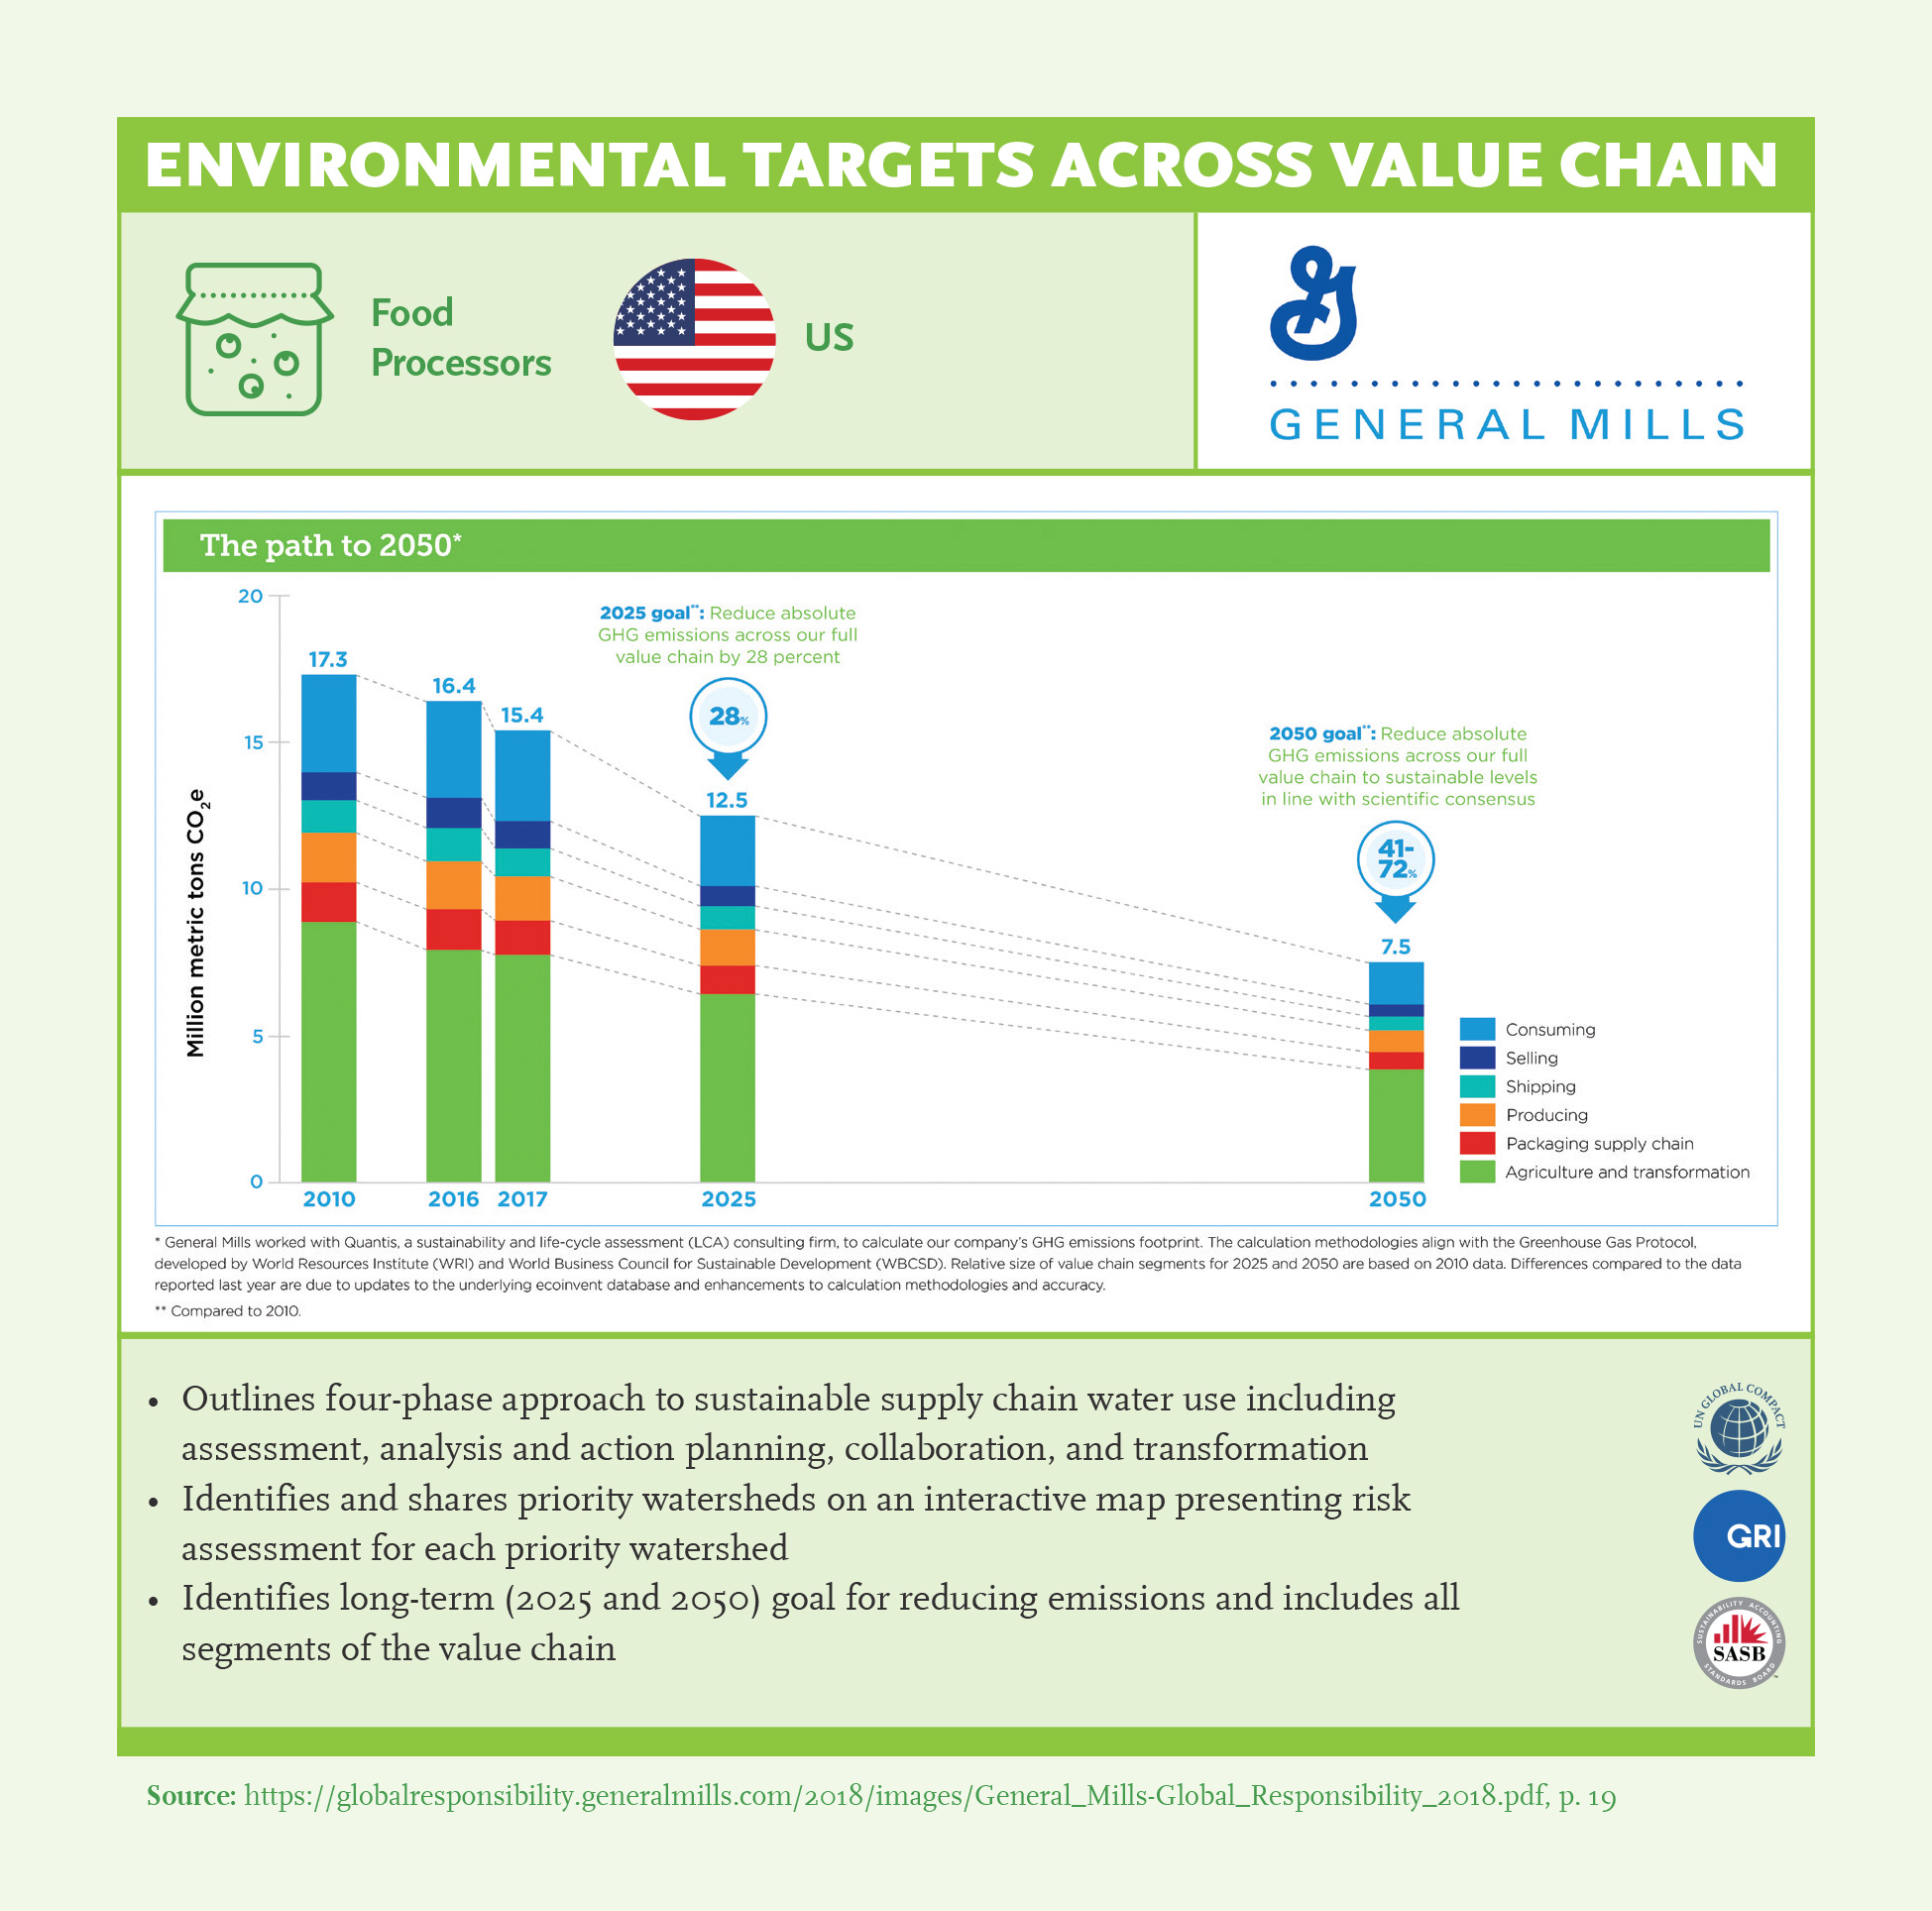 Environmental Targets Across Value Chain: General Mills